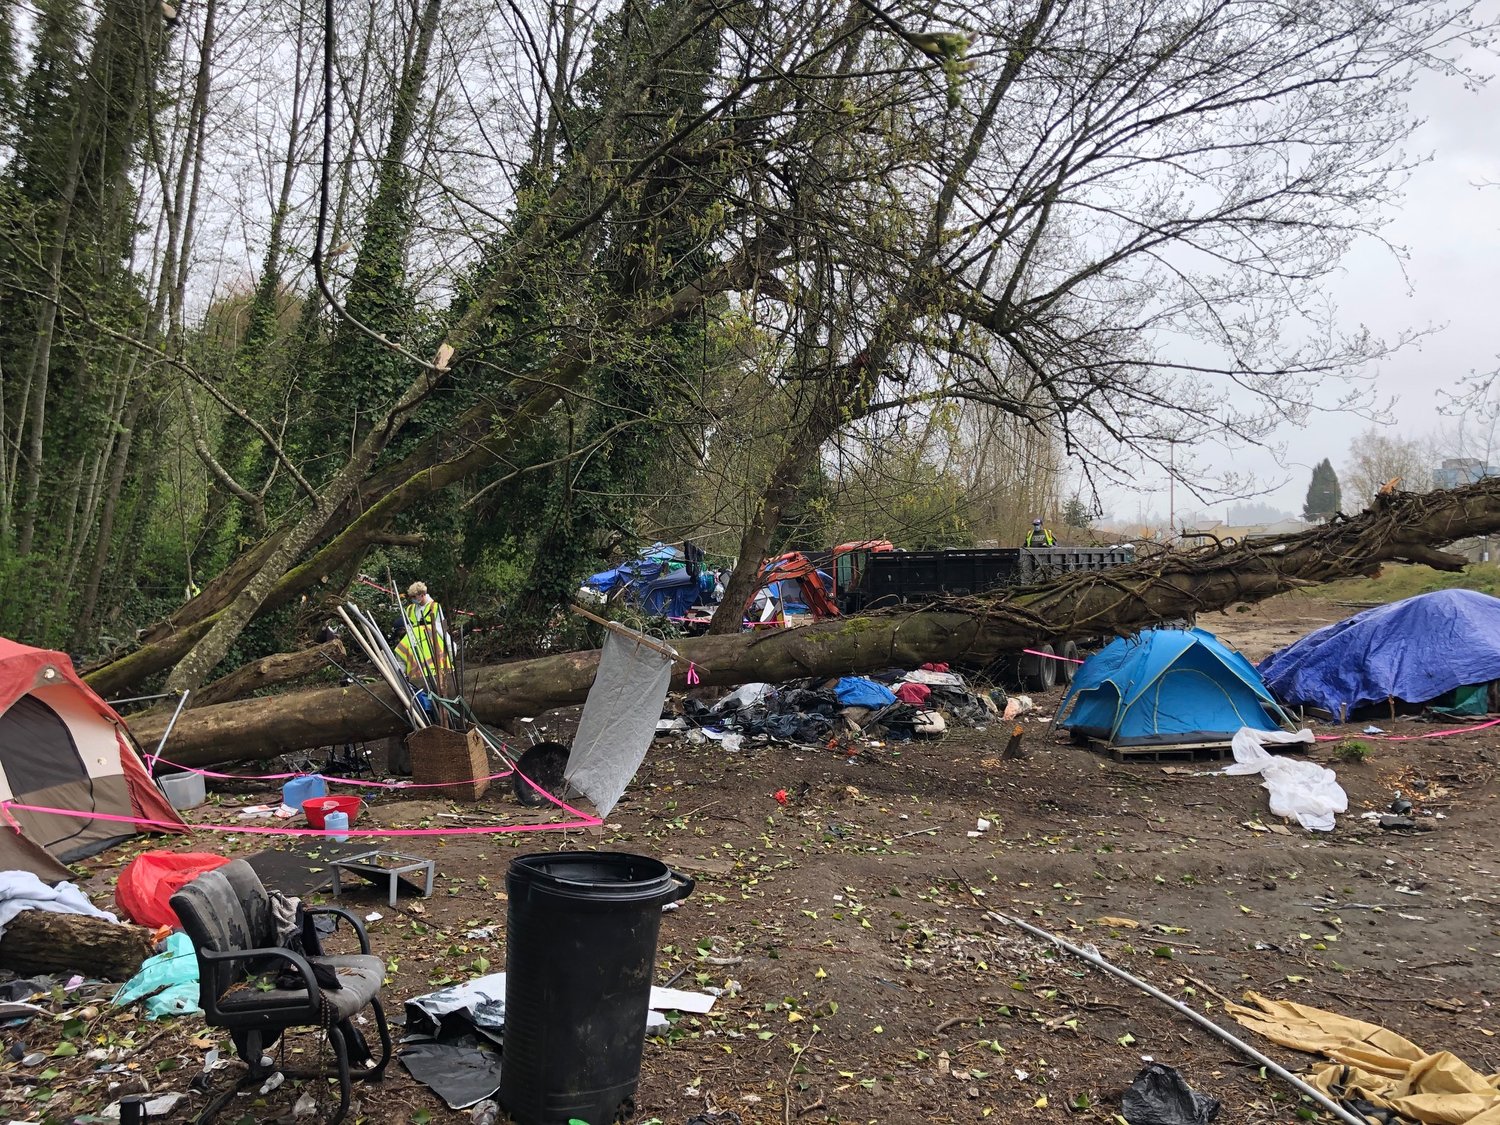 Workers from Advance Environmental used rakes and shovels to gather the debris at the homeless encampment on Deschutes Parkway on Day 1 of the cleanup project that started Wed., April 7, 2021.